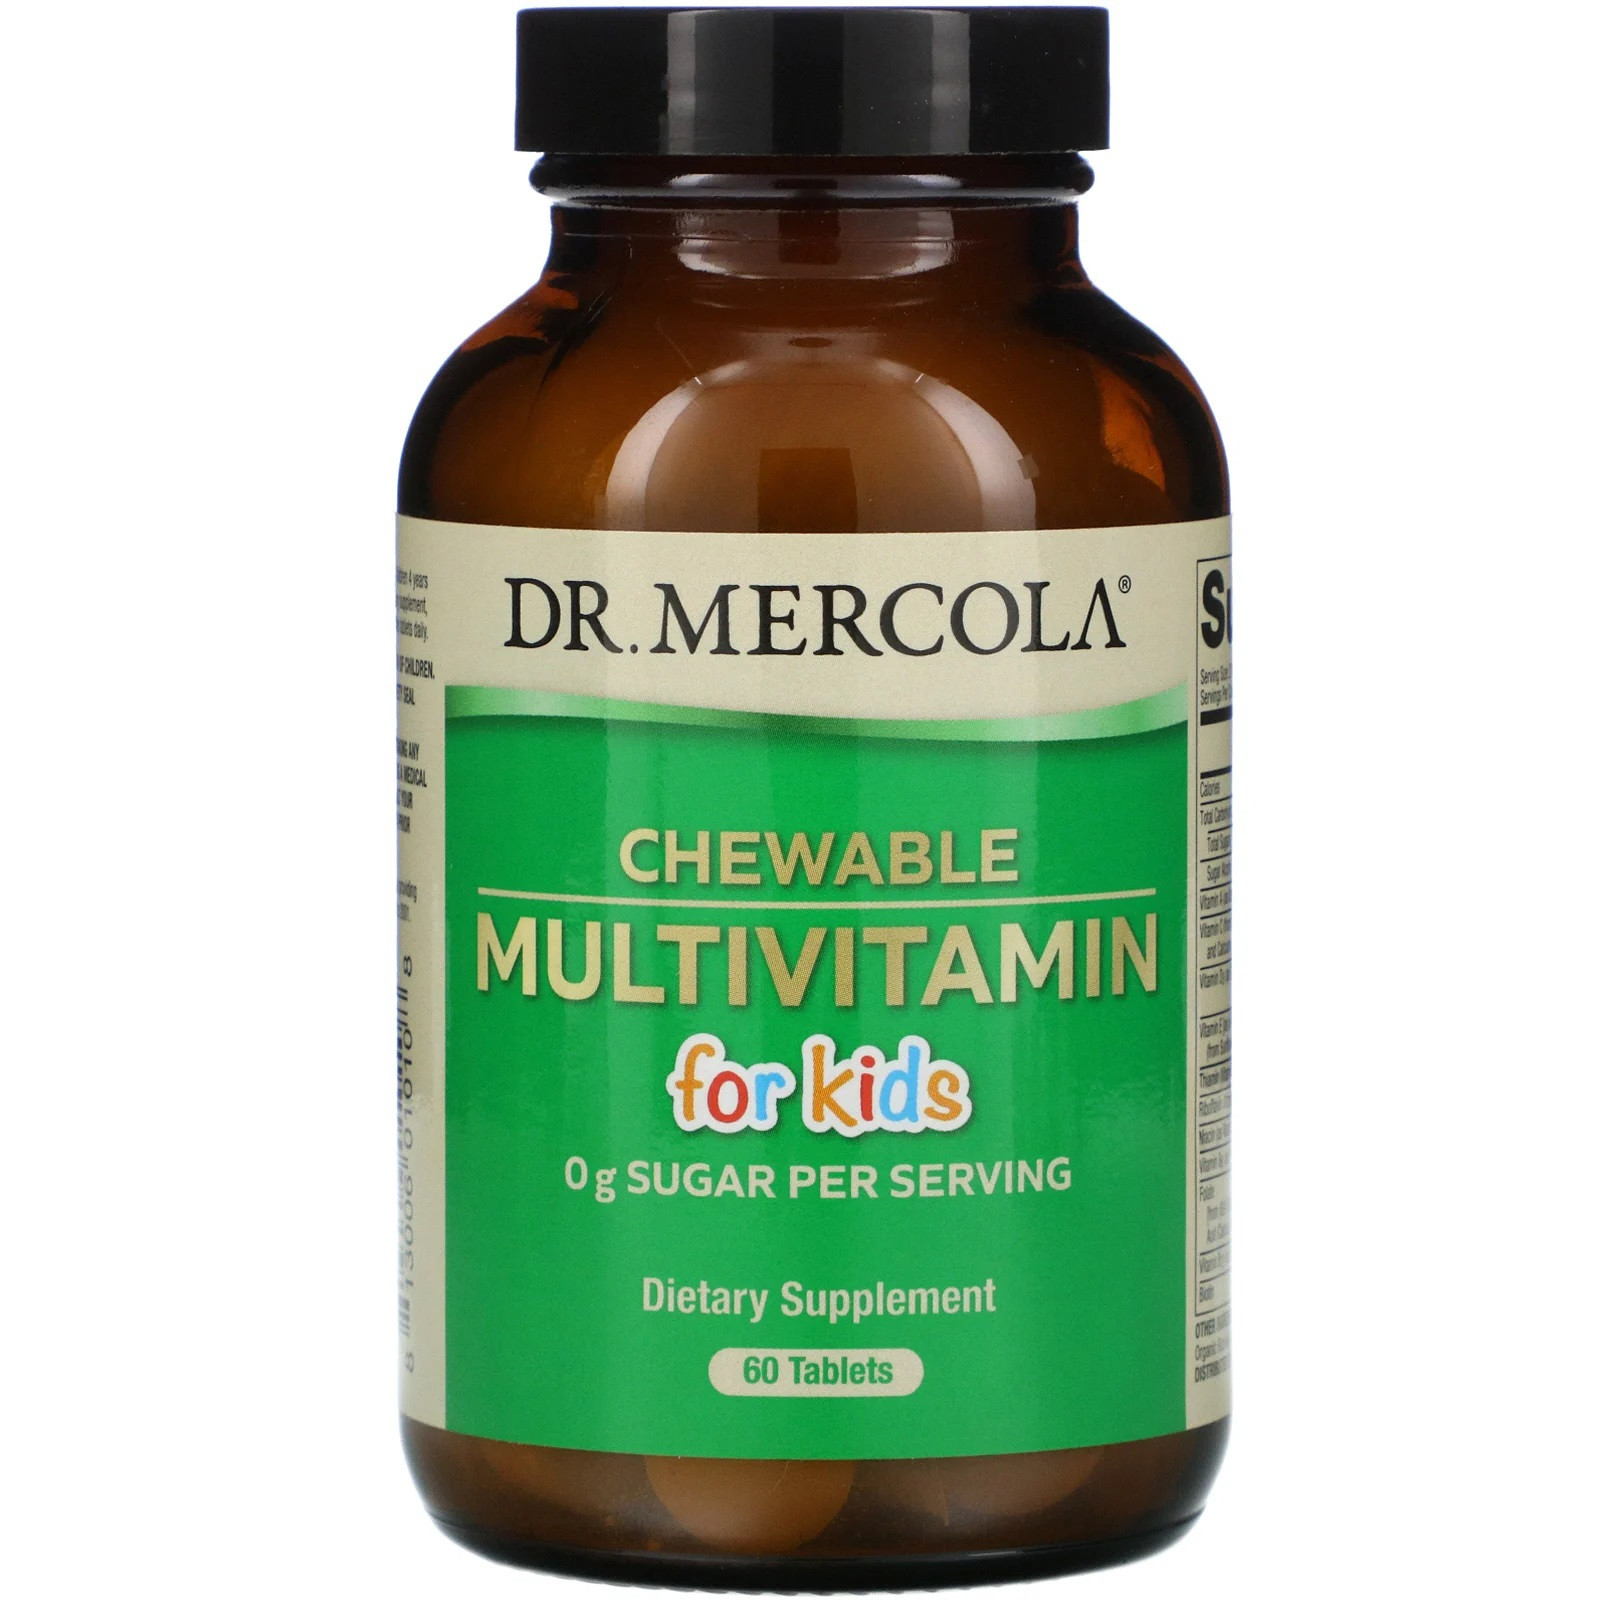 Children&apos;s Multivitamin Fruit Flavored Chewables (60 Tablets) - Dr. Mercola